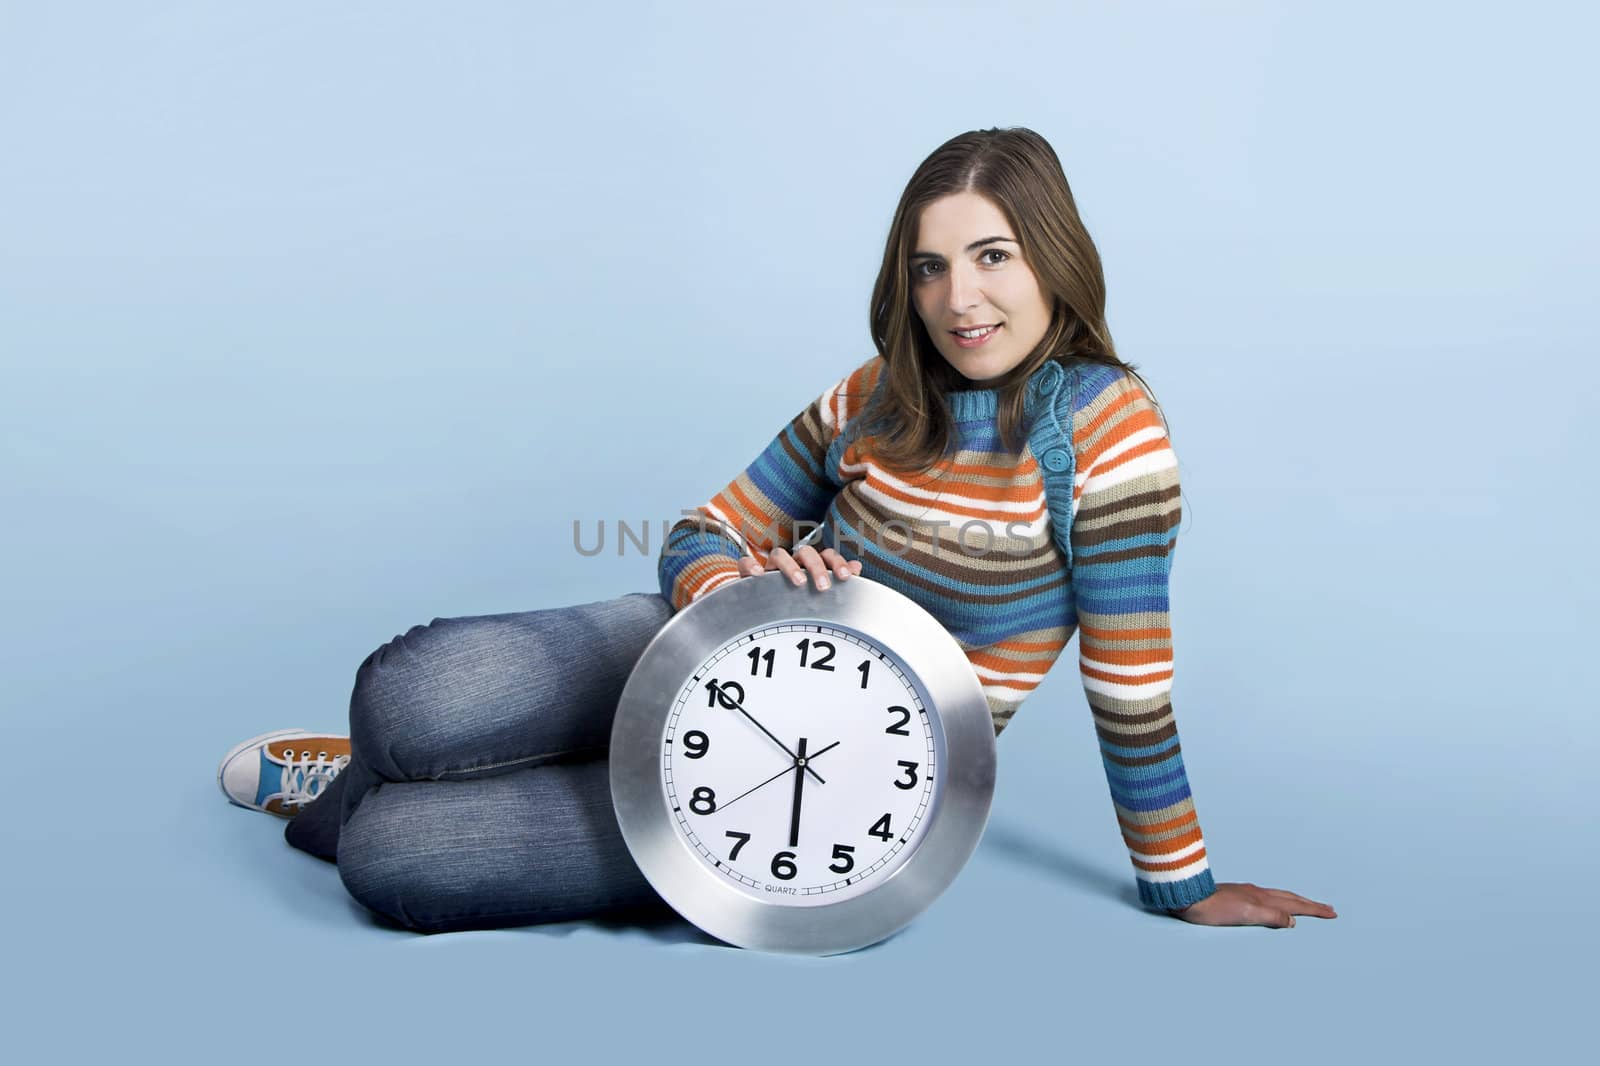 Beautiful woman seated on the ground holding a clock